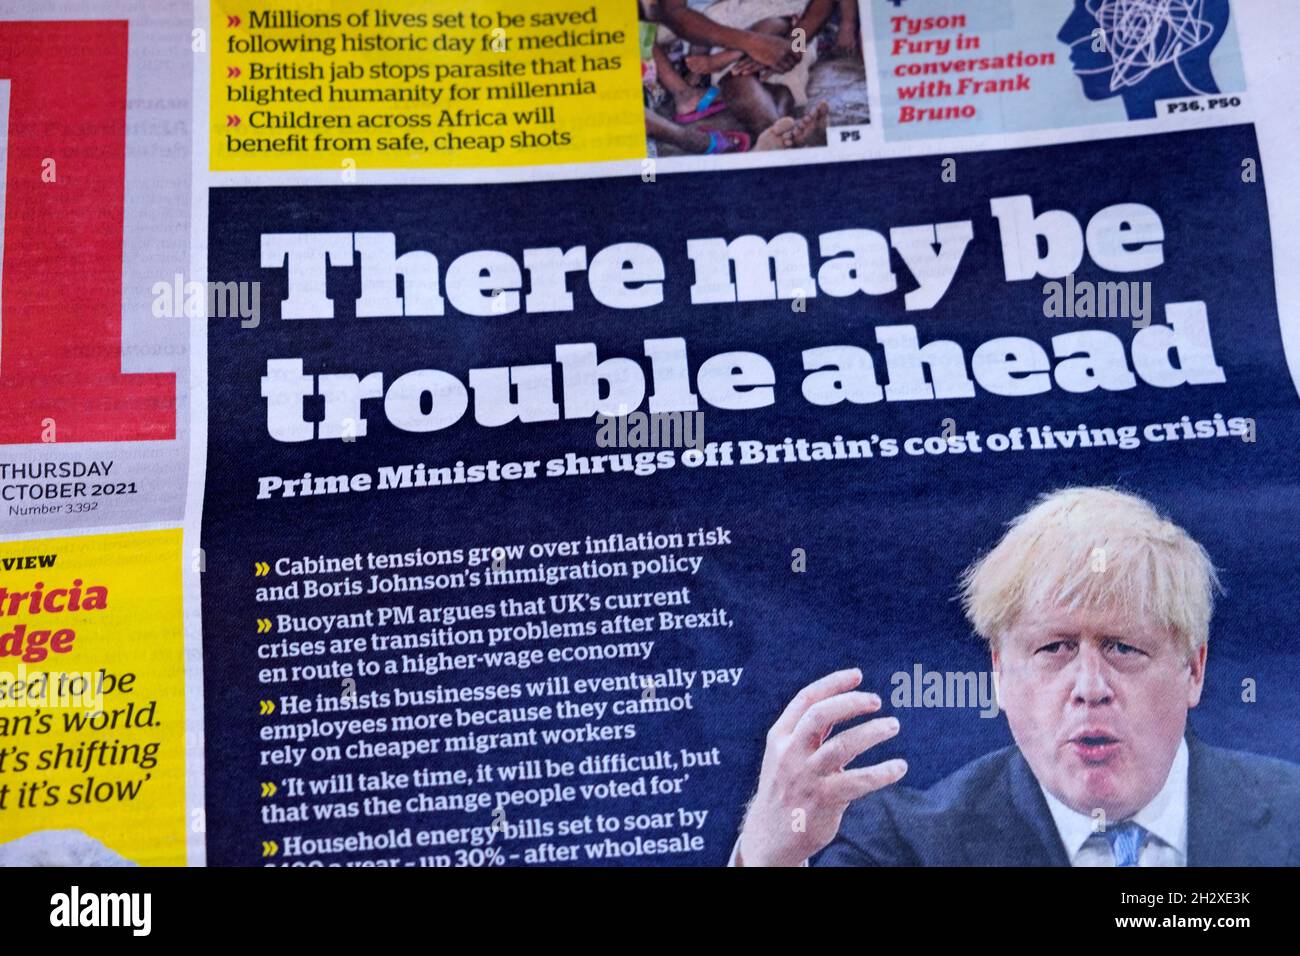 Boris Johnson There May Be Trouble Ahead I Newspaper Headline Front Page On 7 October 21 London England Uk Stock Photo Alamy